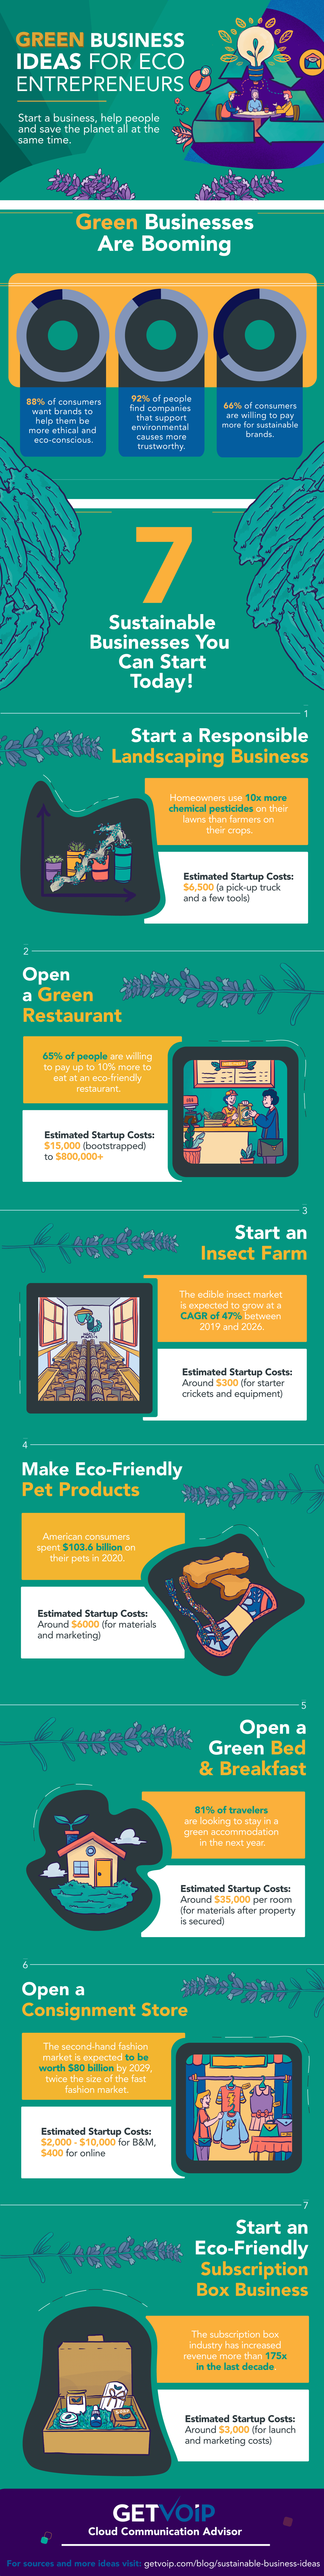 infographic - sustainable business ideas you can start today